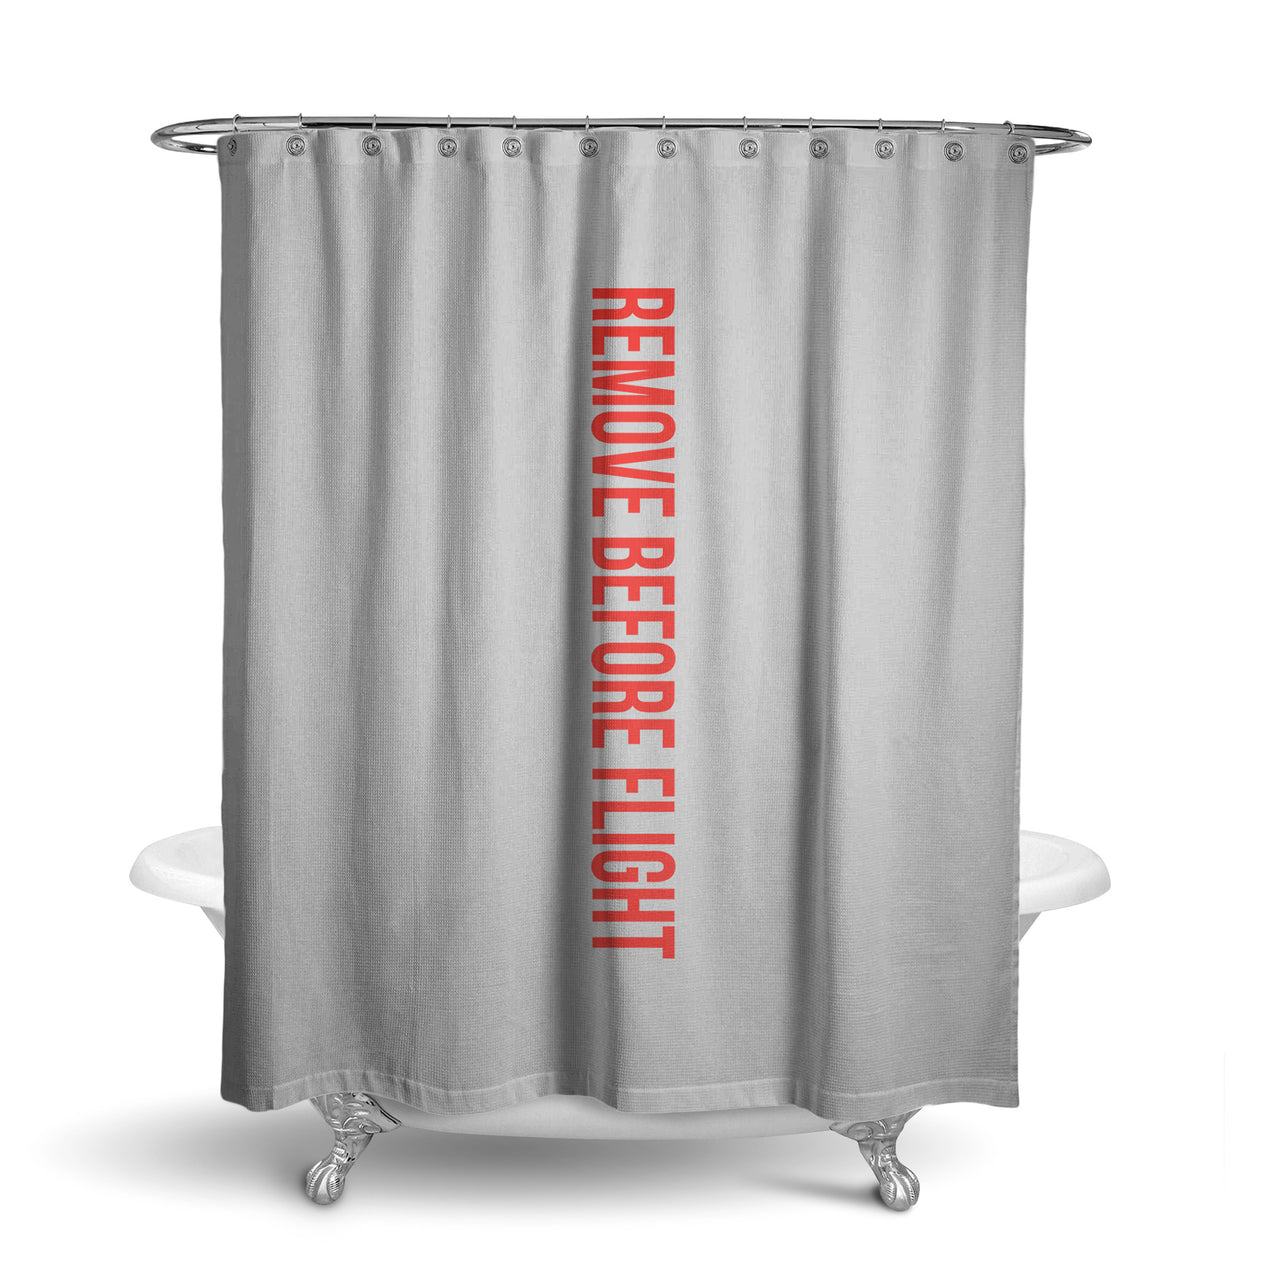 Remove Before Flight 2 Designed Shower Curtains